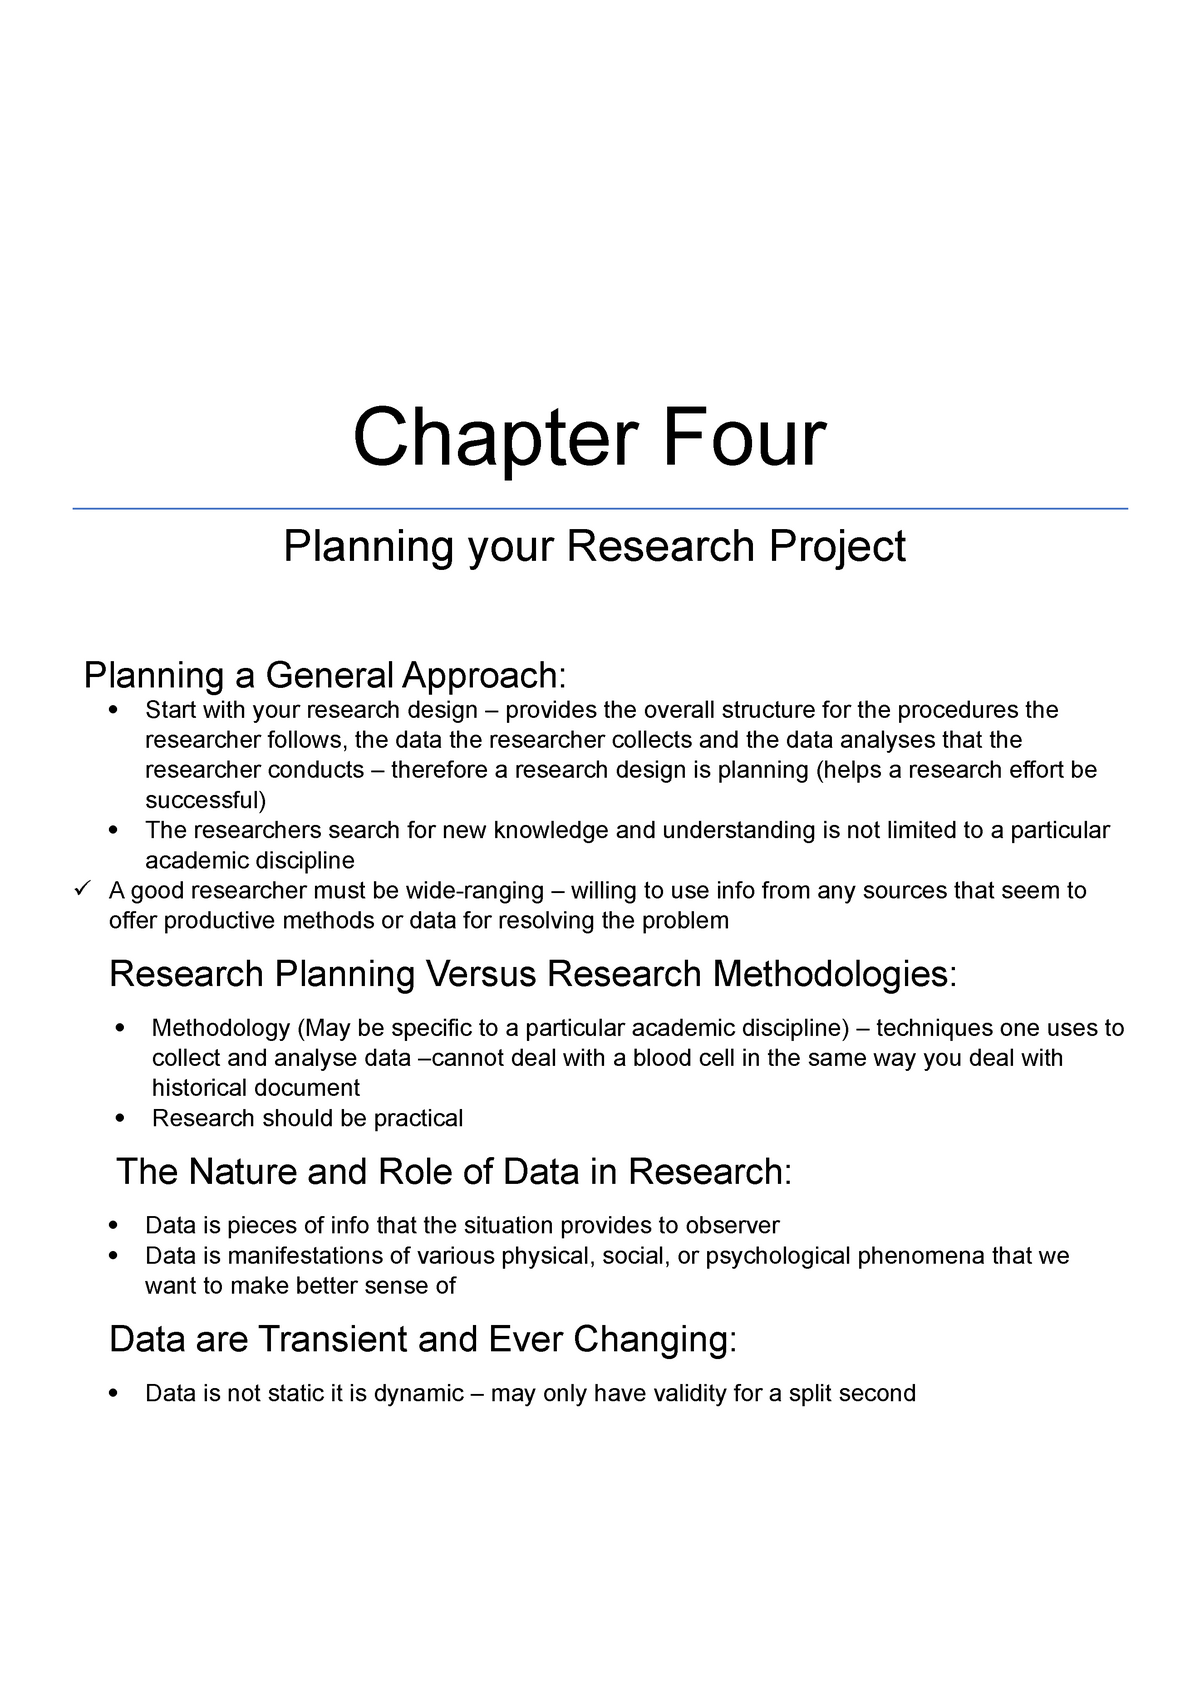 how to do research chapter 4